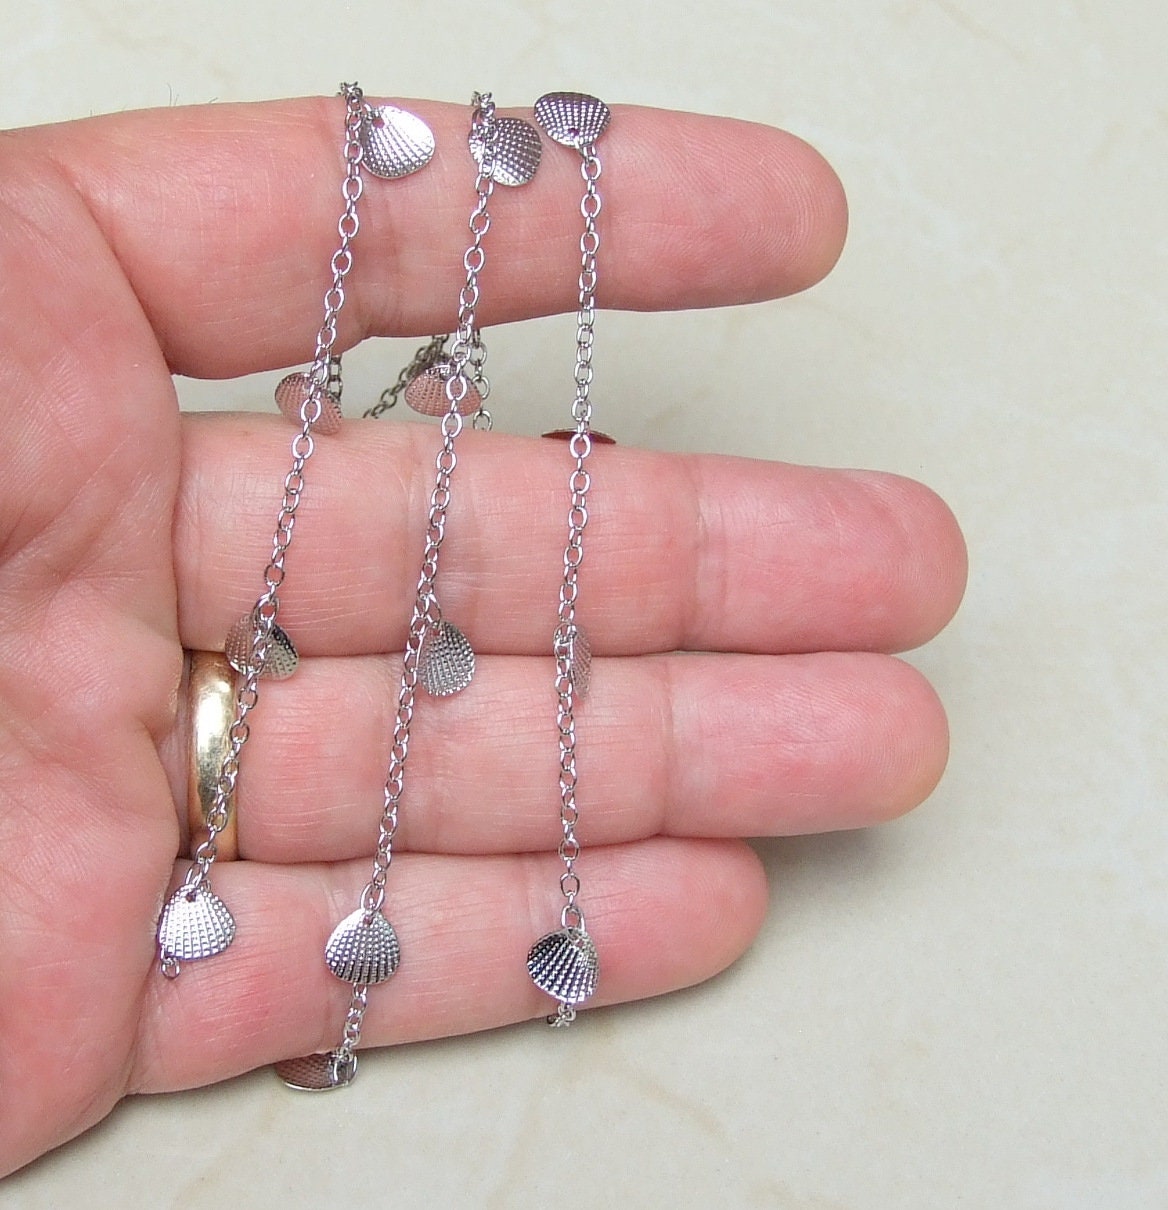 Silver Plated Shell Shaped Chain, Necklace Chain, Bulk Chain, Jewelry Making, Body Chain, Belly Chain, By the Foot, Shell Chain, 2.5mm x 2mm